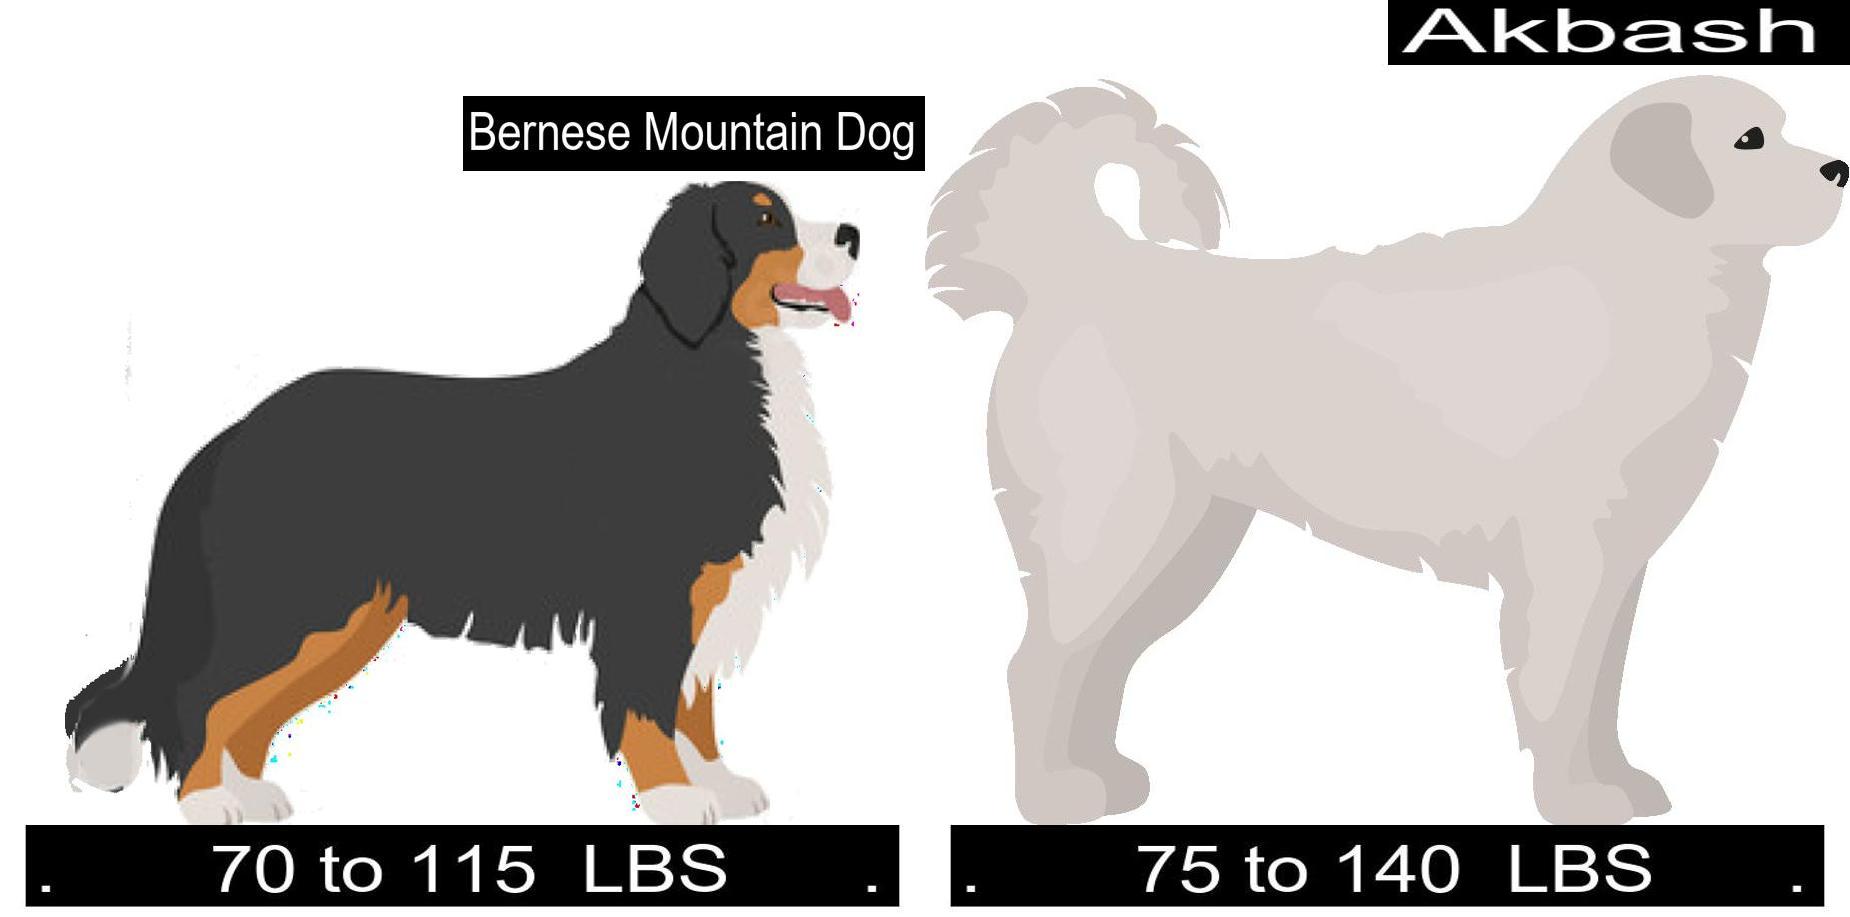 Bernese Mountain Dog Versus Akbash. Differences and Similarities